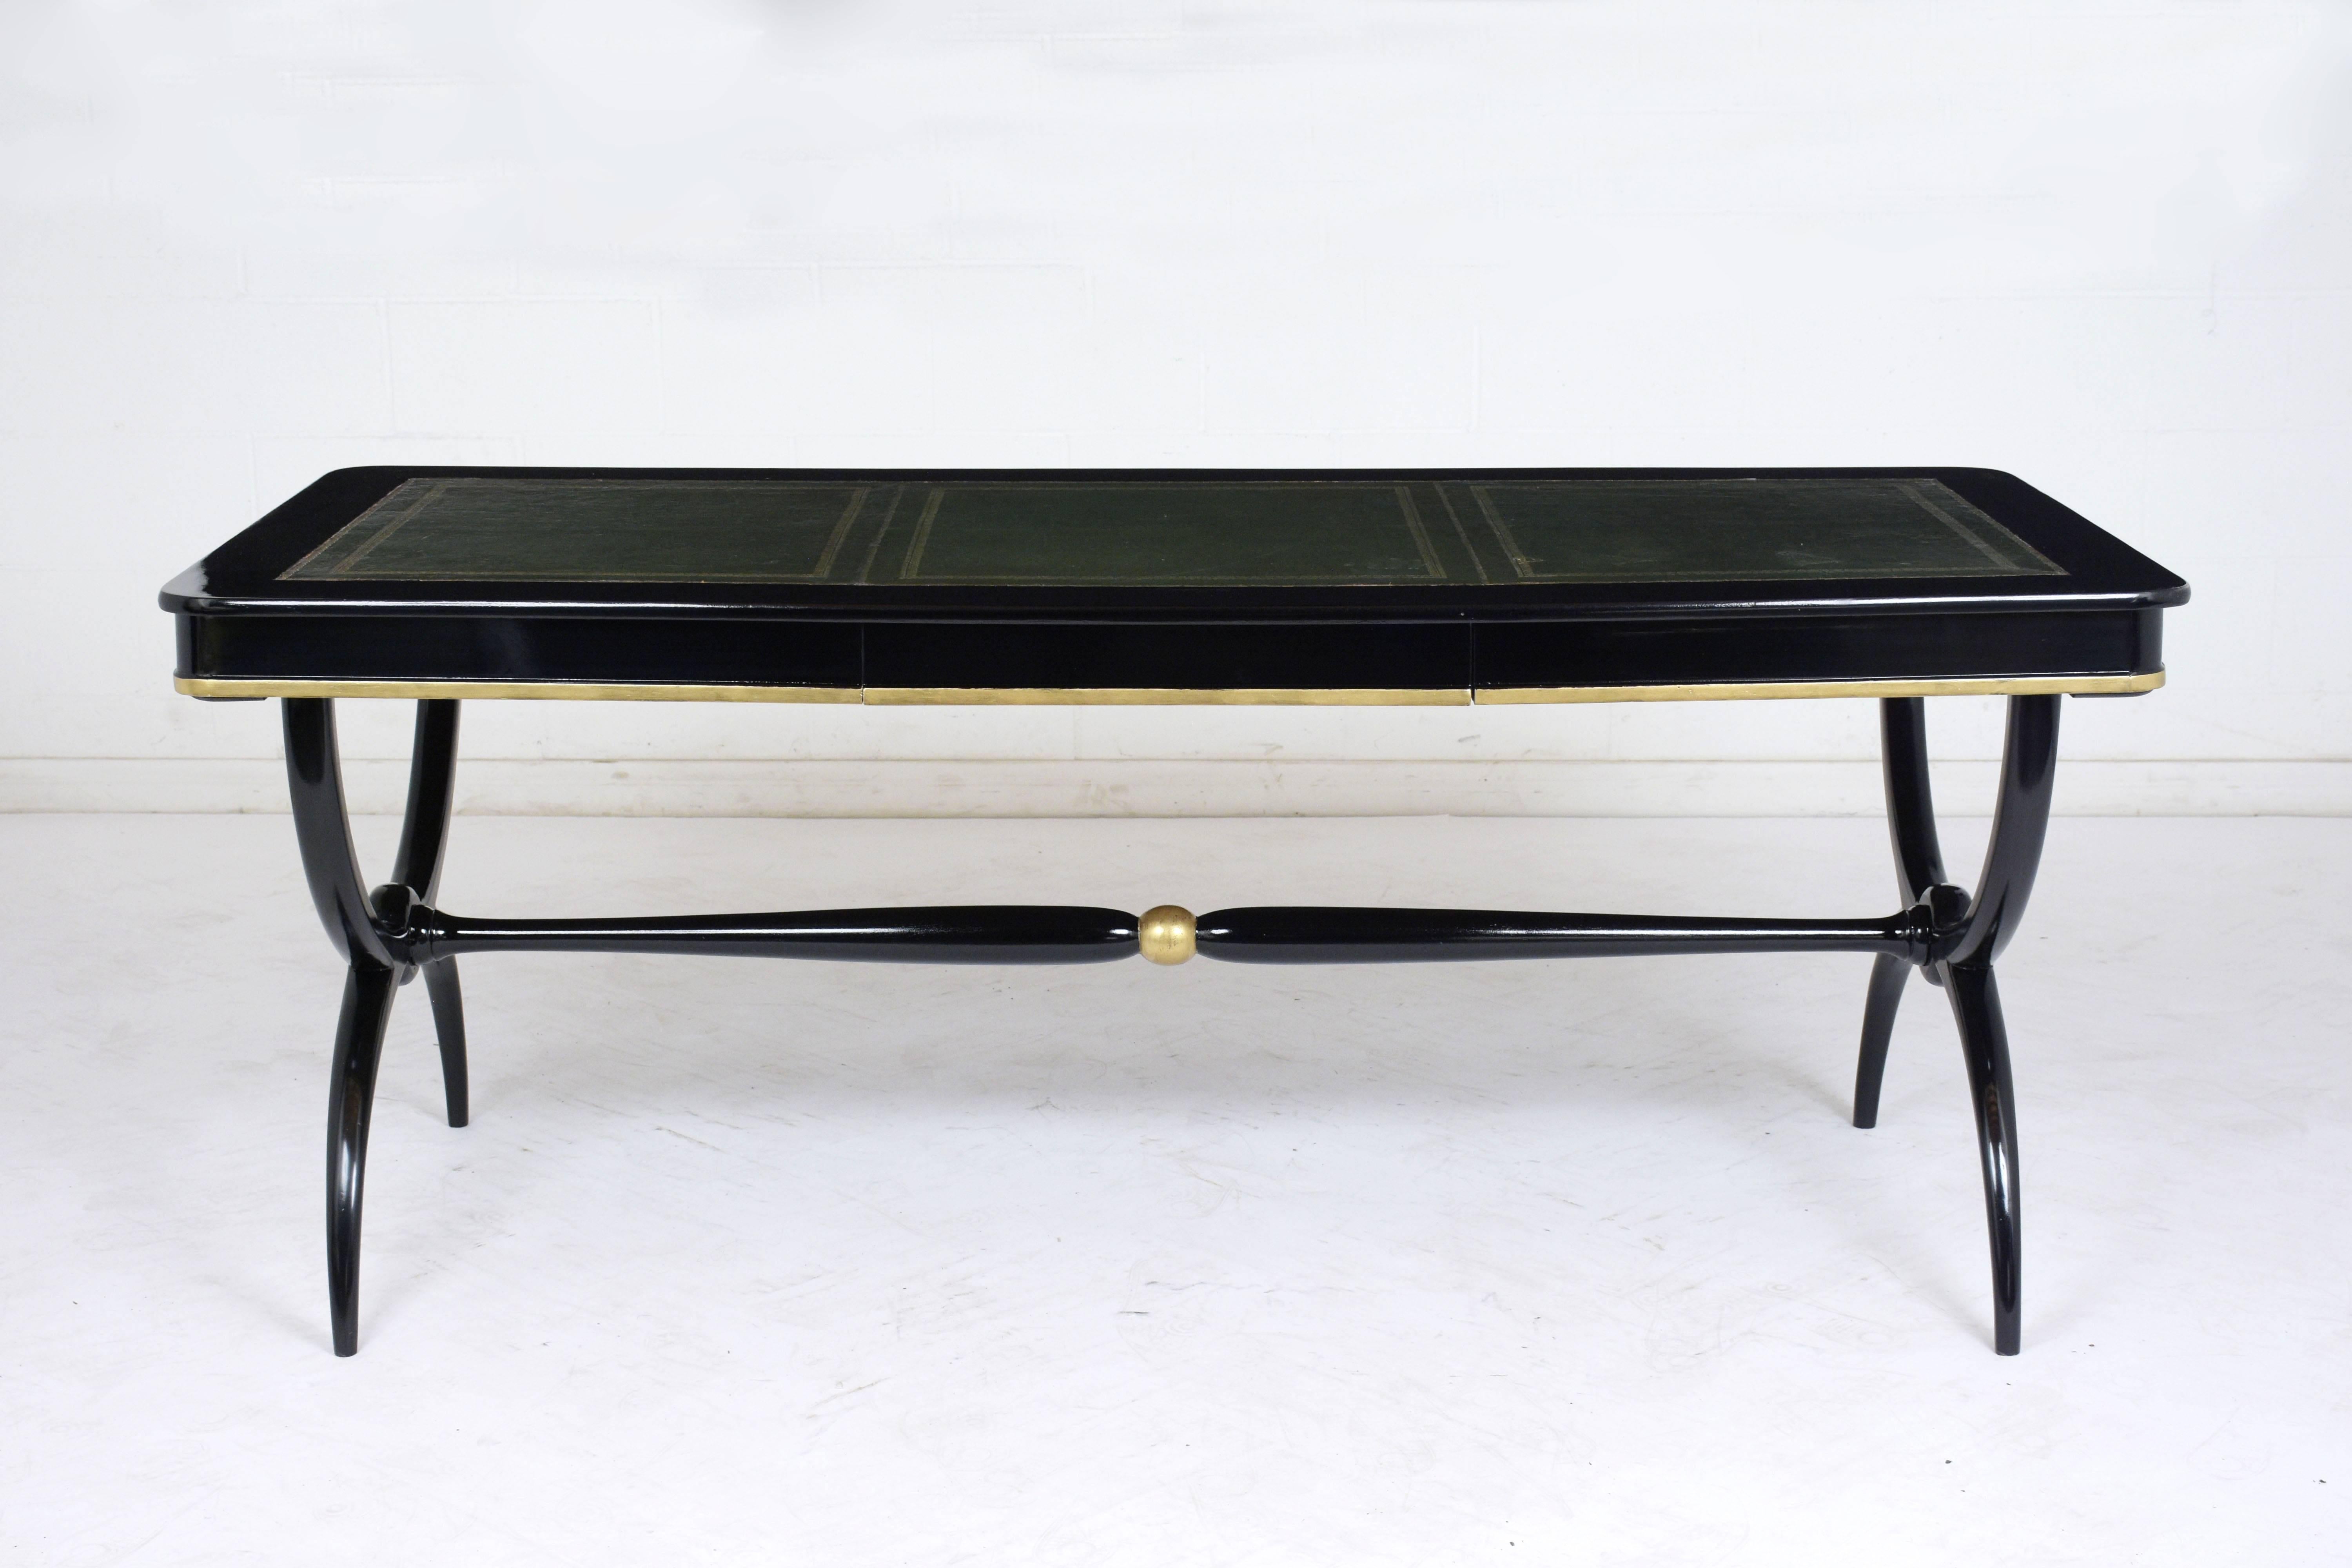 This 1900s English Regency-style desk is made of mahogany wood with an ebonized and lacquered finish. The top of the desk features the original embossed leather insert with gilt trim details. There is a single drawer in the center with a gilt accent